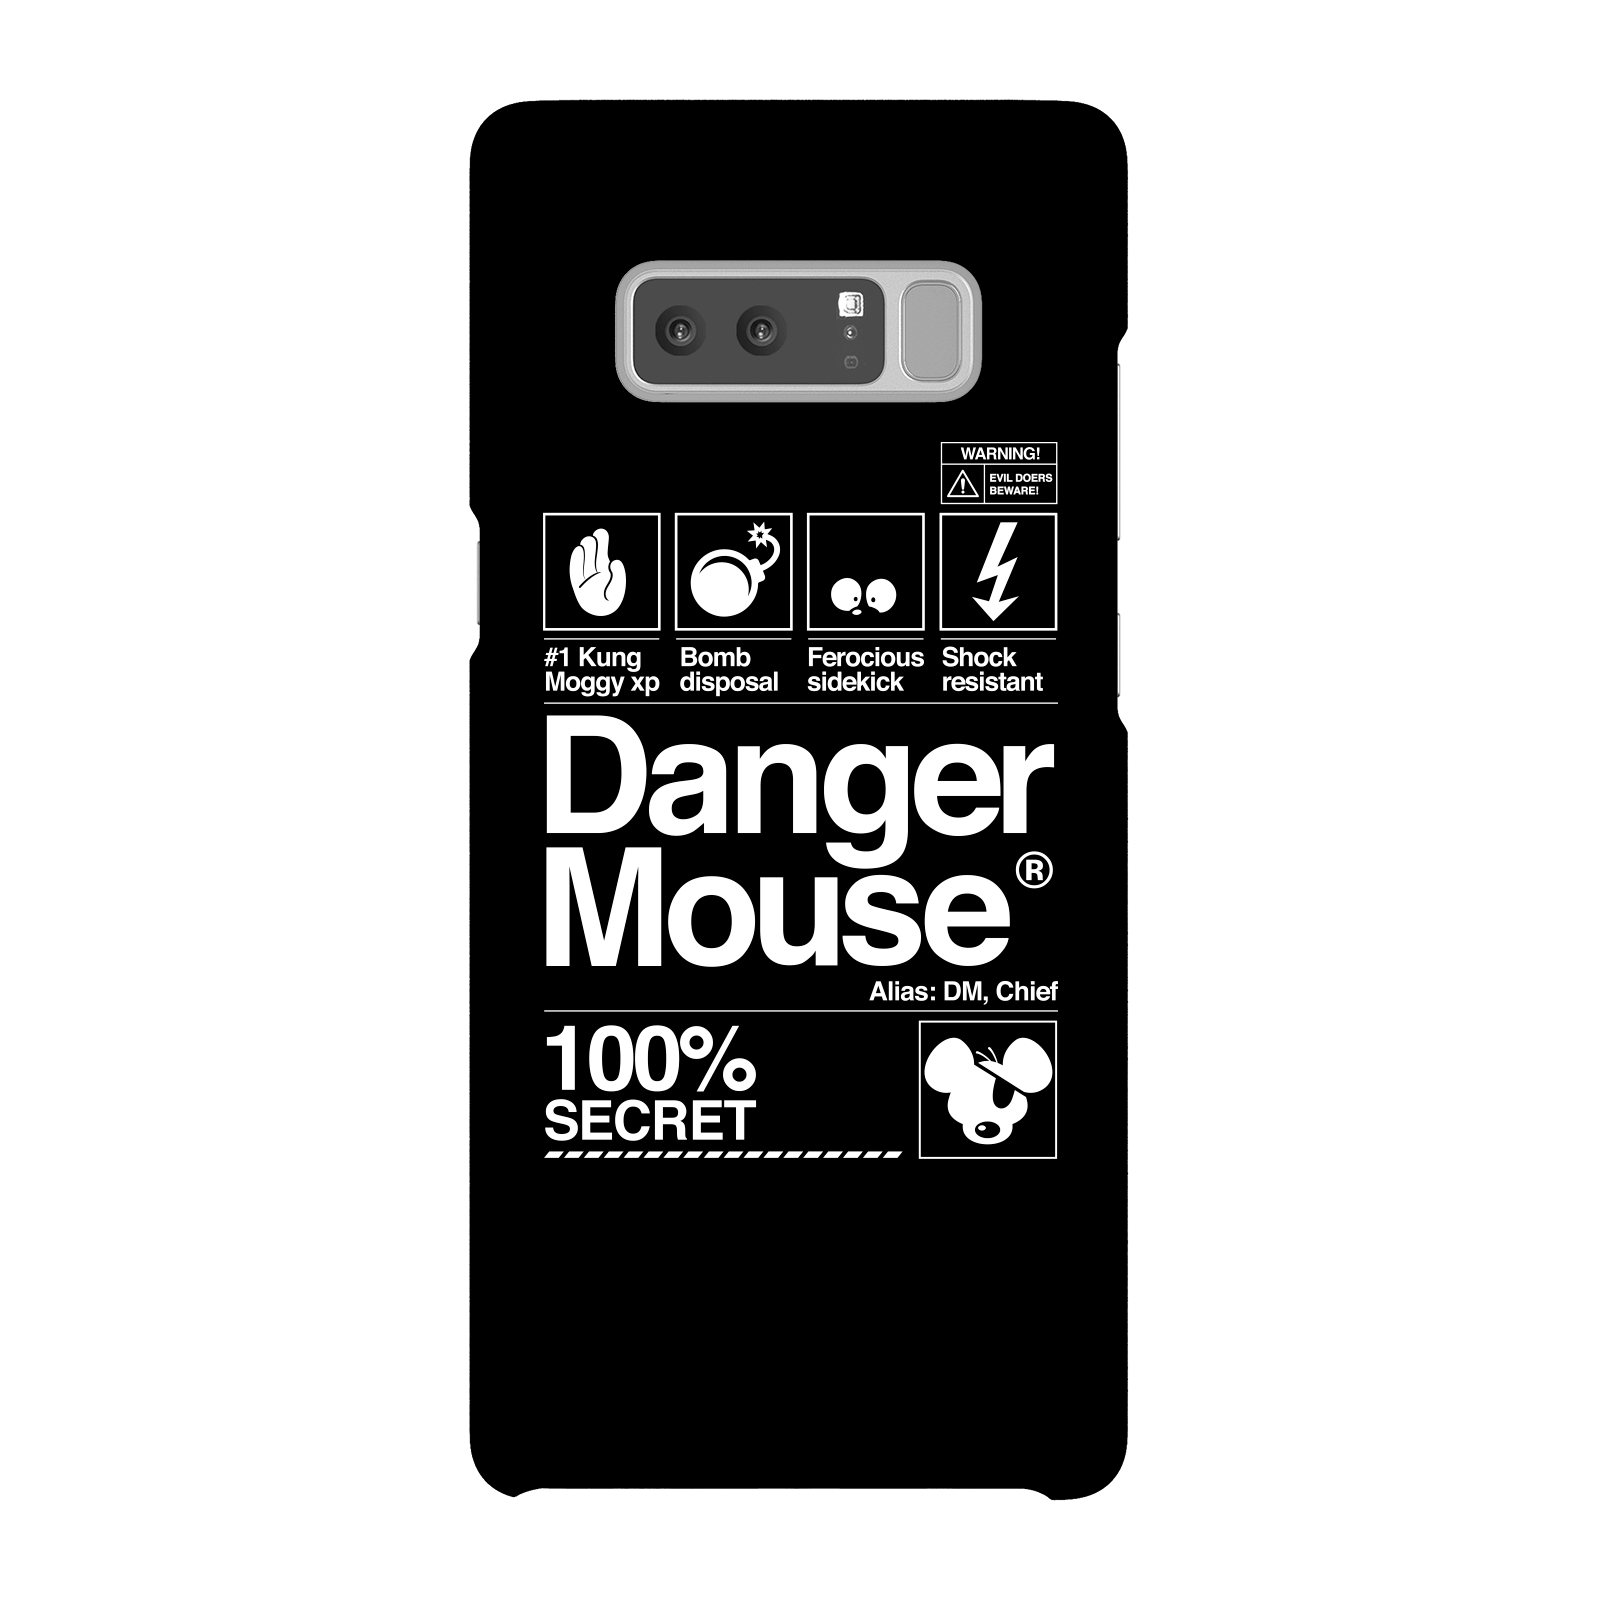 Danger Mouse 100% Secret Phone Case for iPhone and Android - Samsung Note 8 - Snap Case - Matte